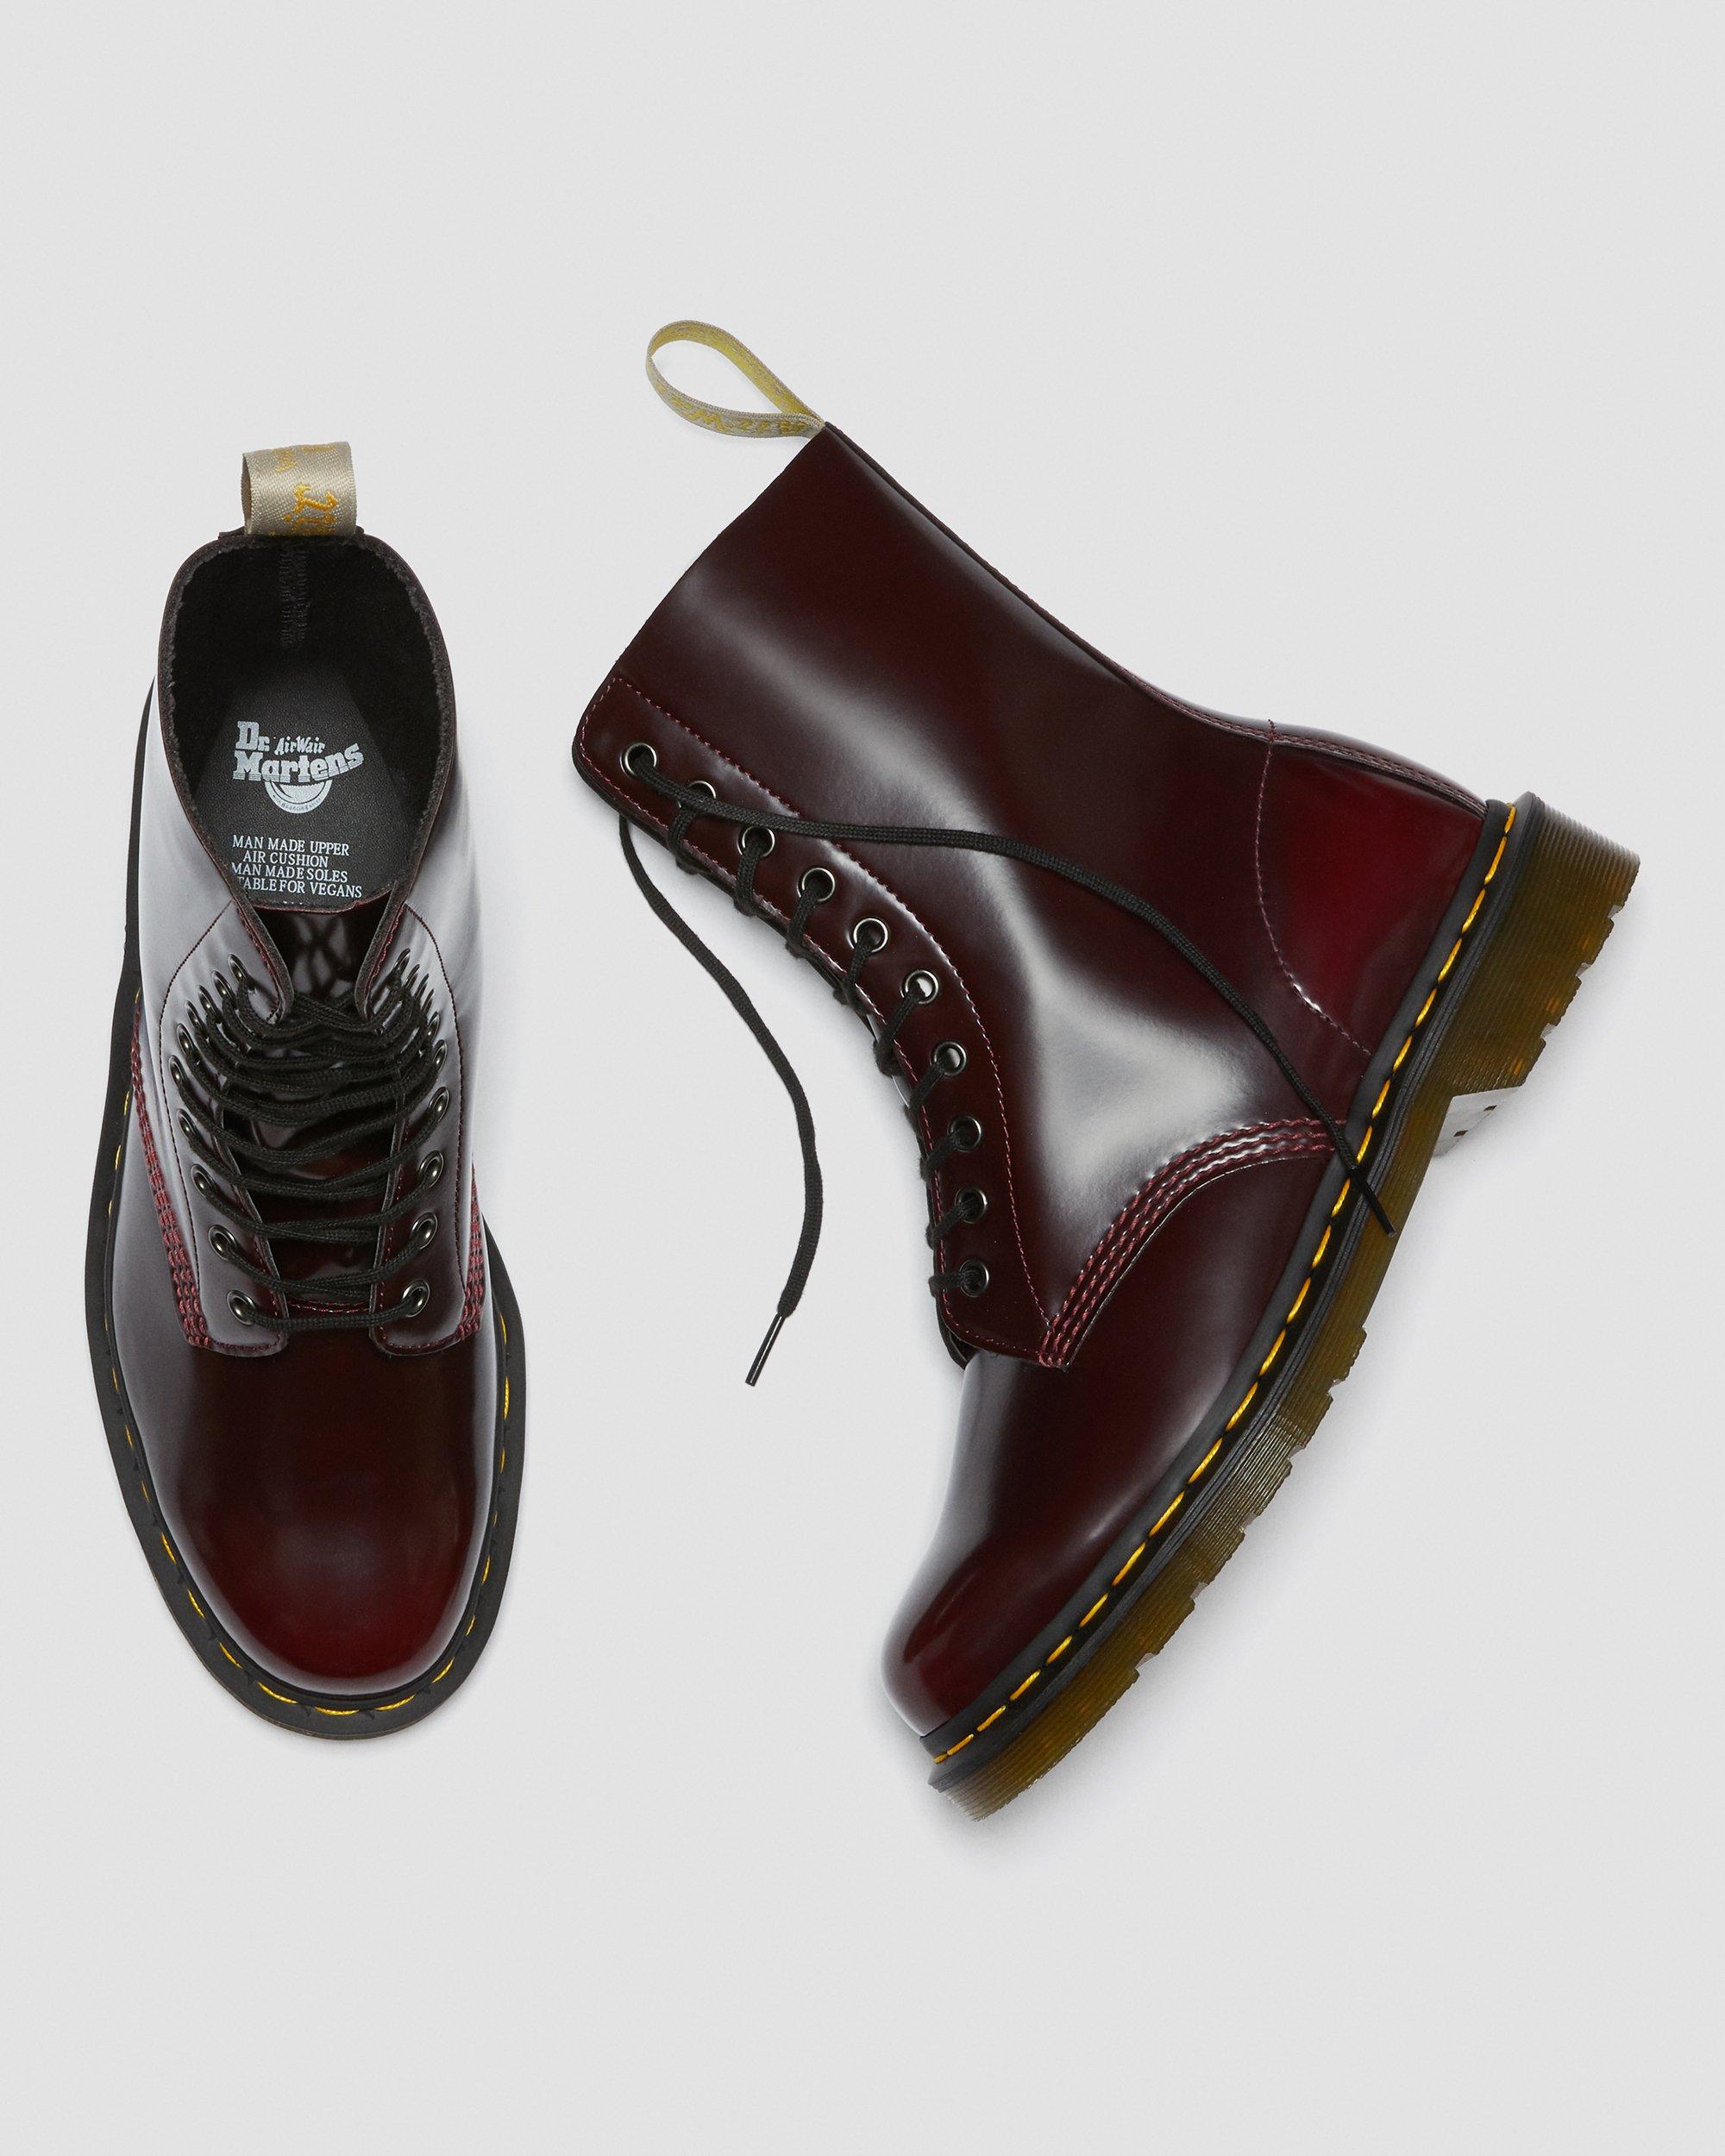 VEGAN 1490 HIGH BOOTS in Cherry Red